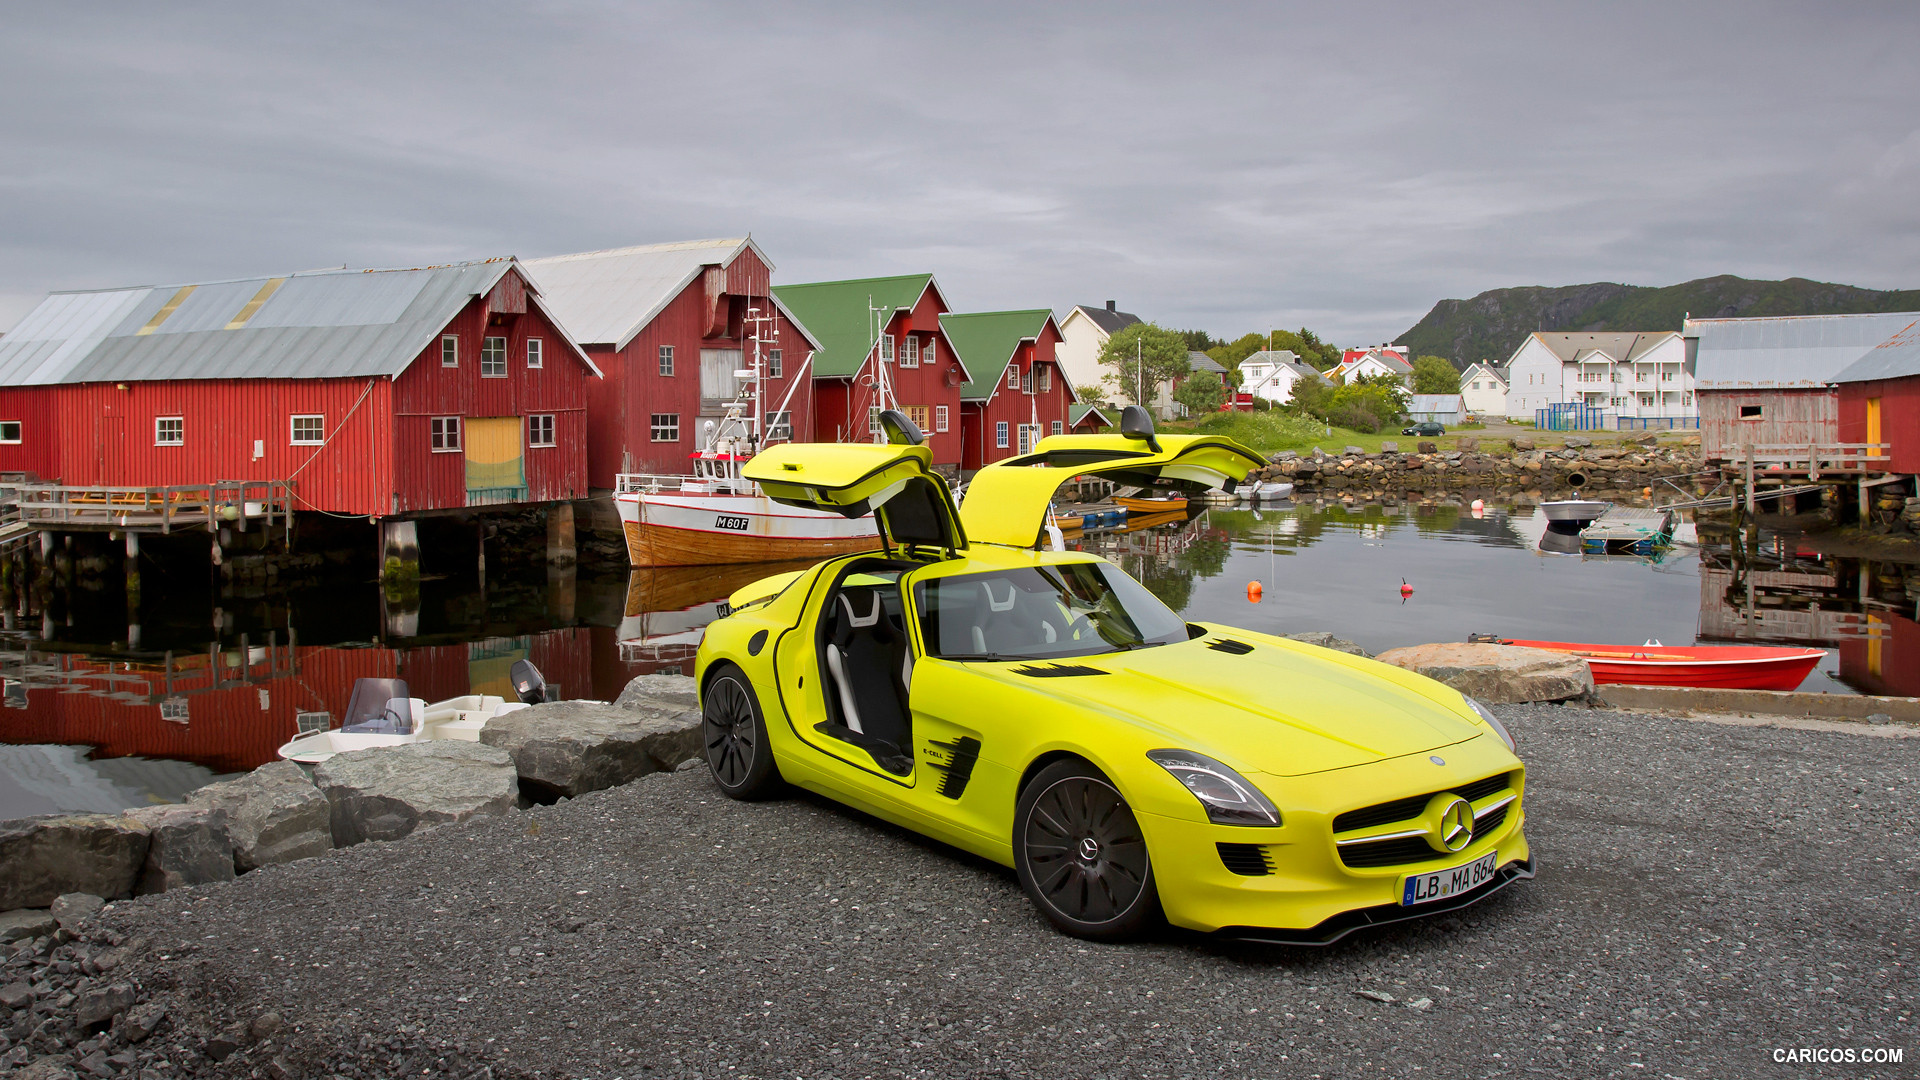 Mercedes-Benz SLS AMG E-CELL Concept  - Side, #2 of 60